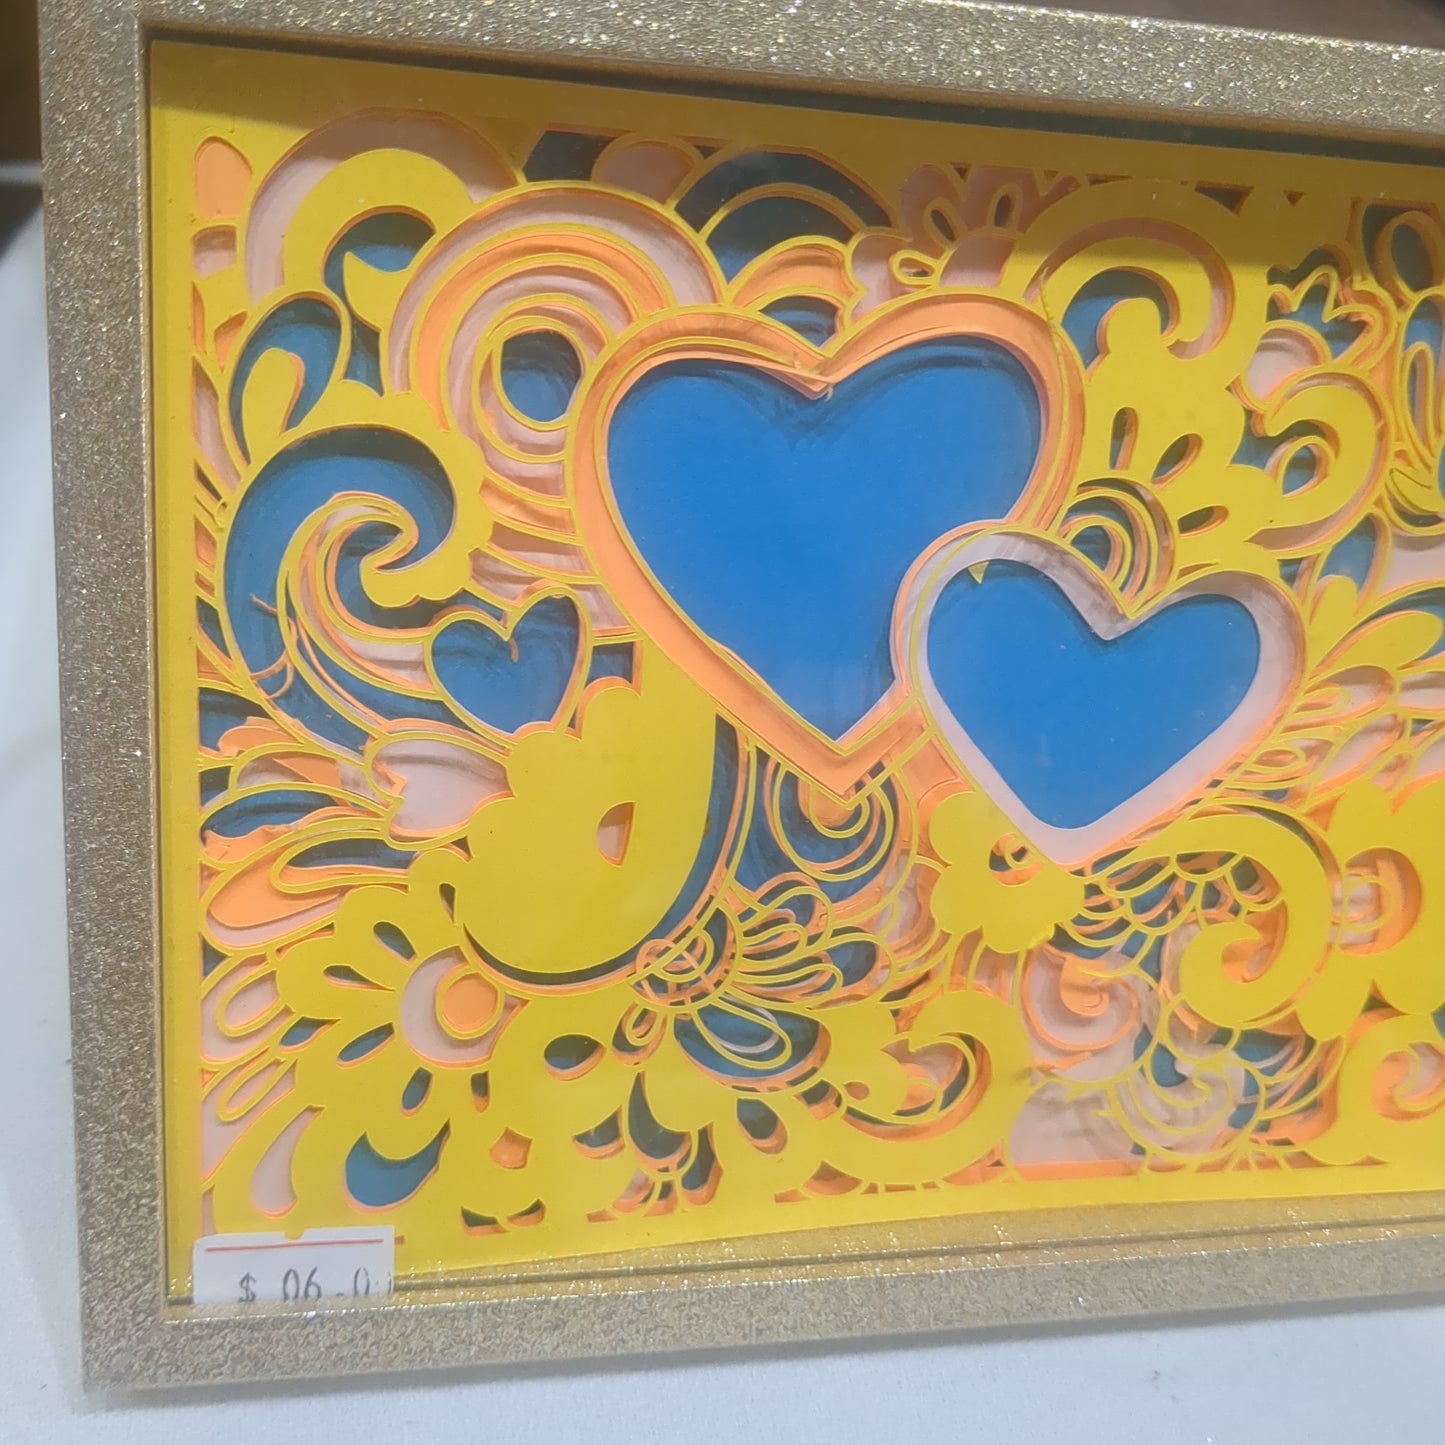 5 x 7“ gold shadowbox with Papercut paisley heart